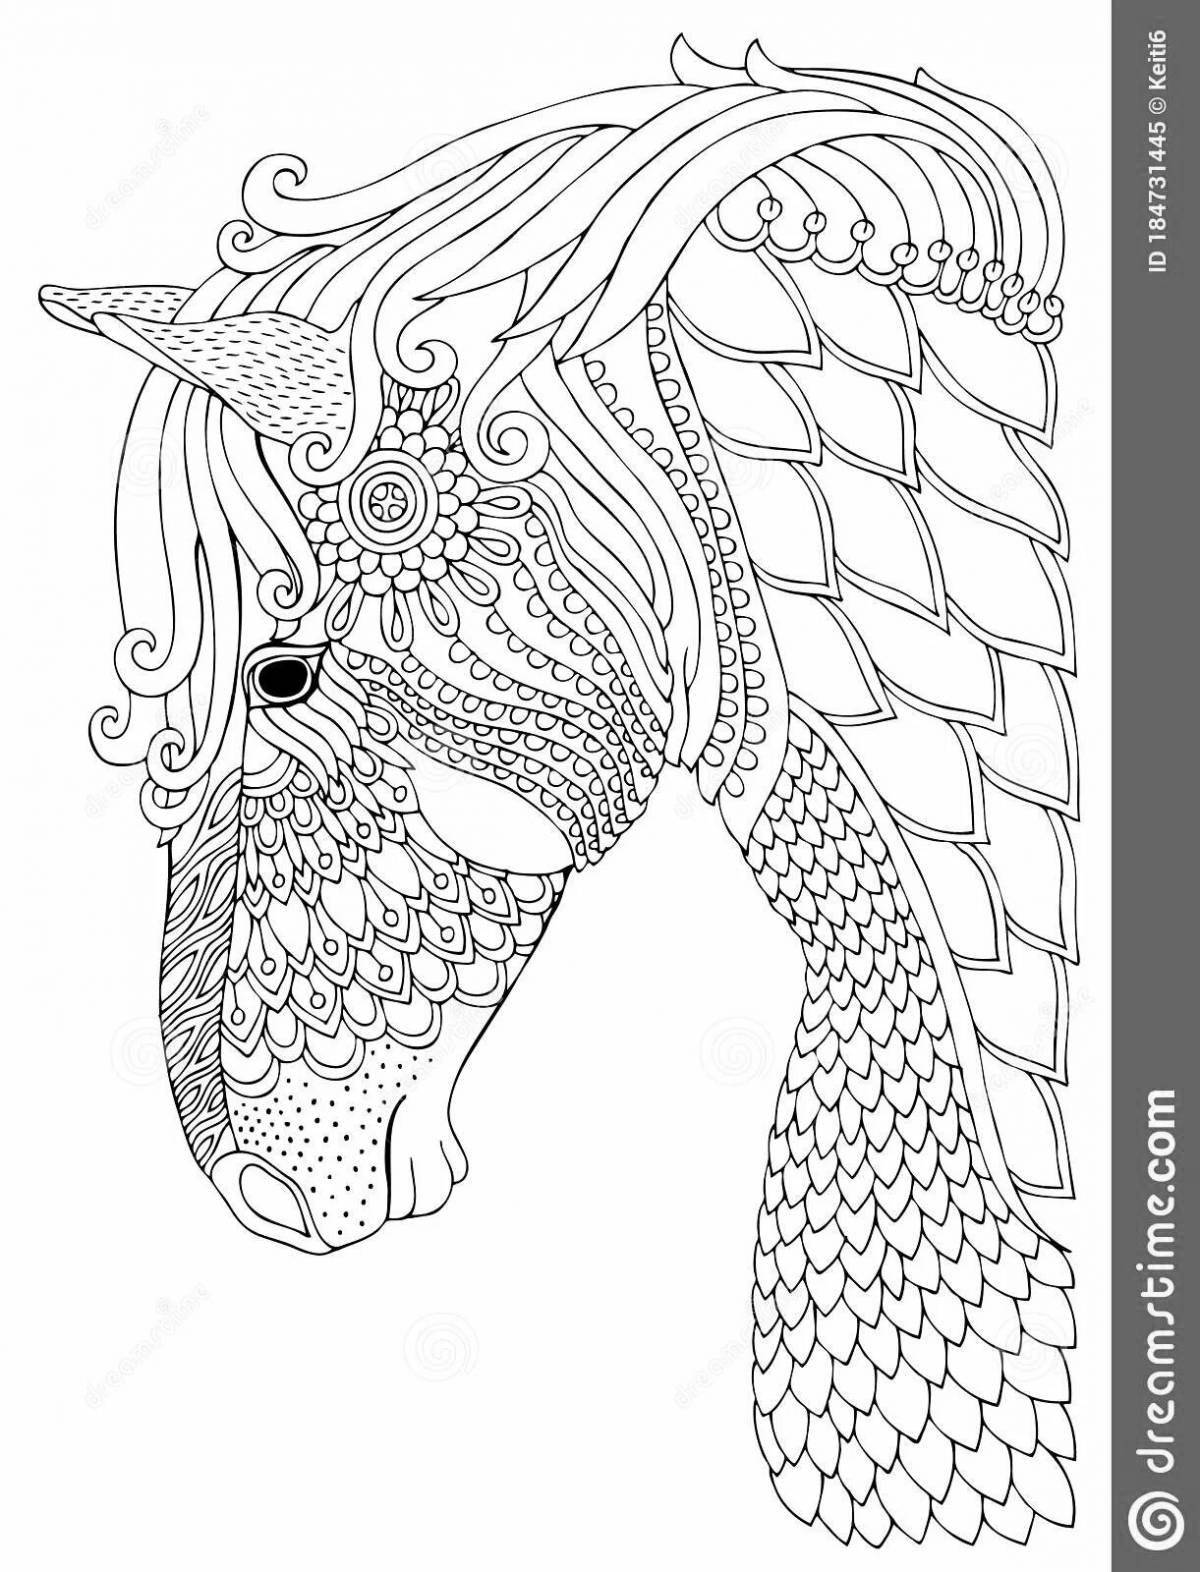 Exciting anti-stress animal coloring book for kids